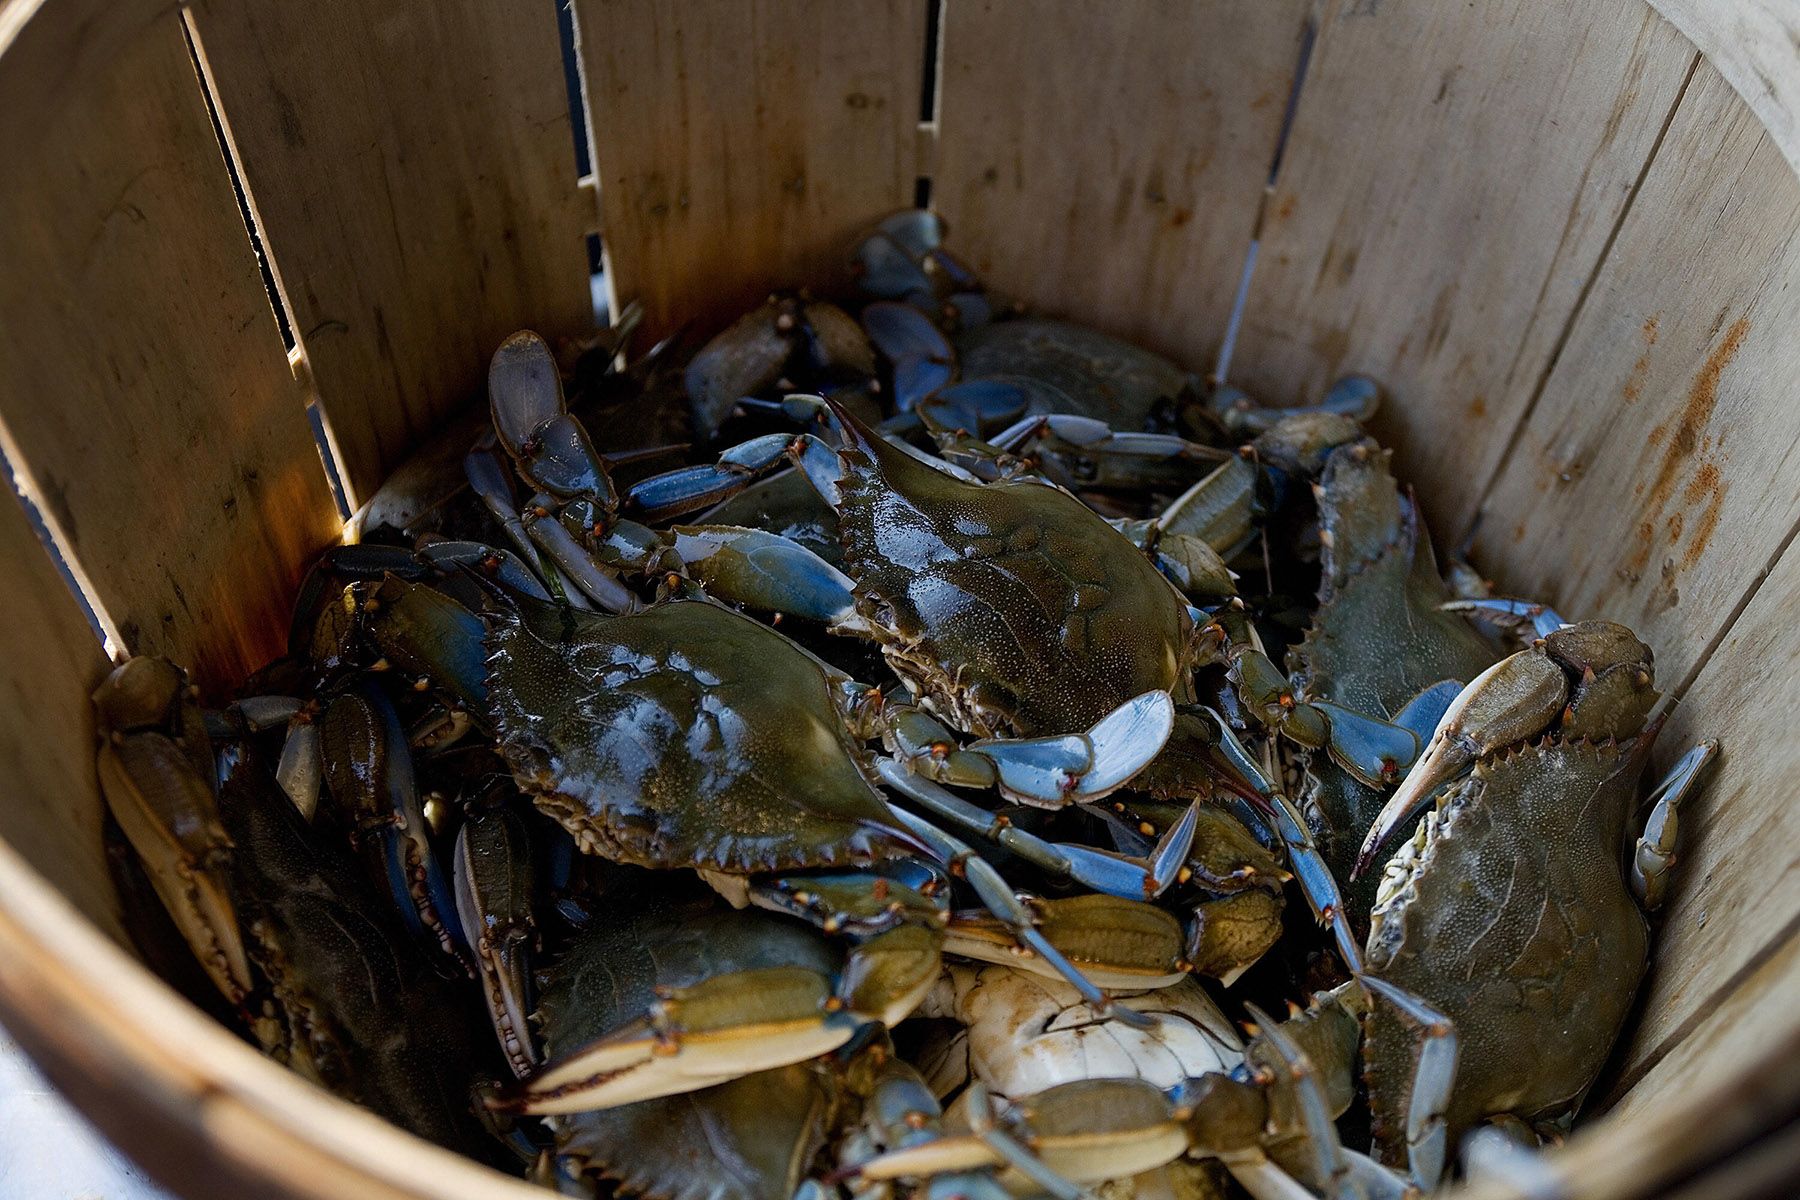 Maryland Blue Crabs rest in a basket at a restaurant in St. Michaels, Maryland